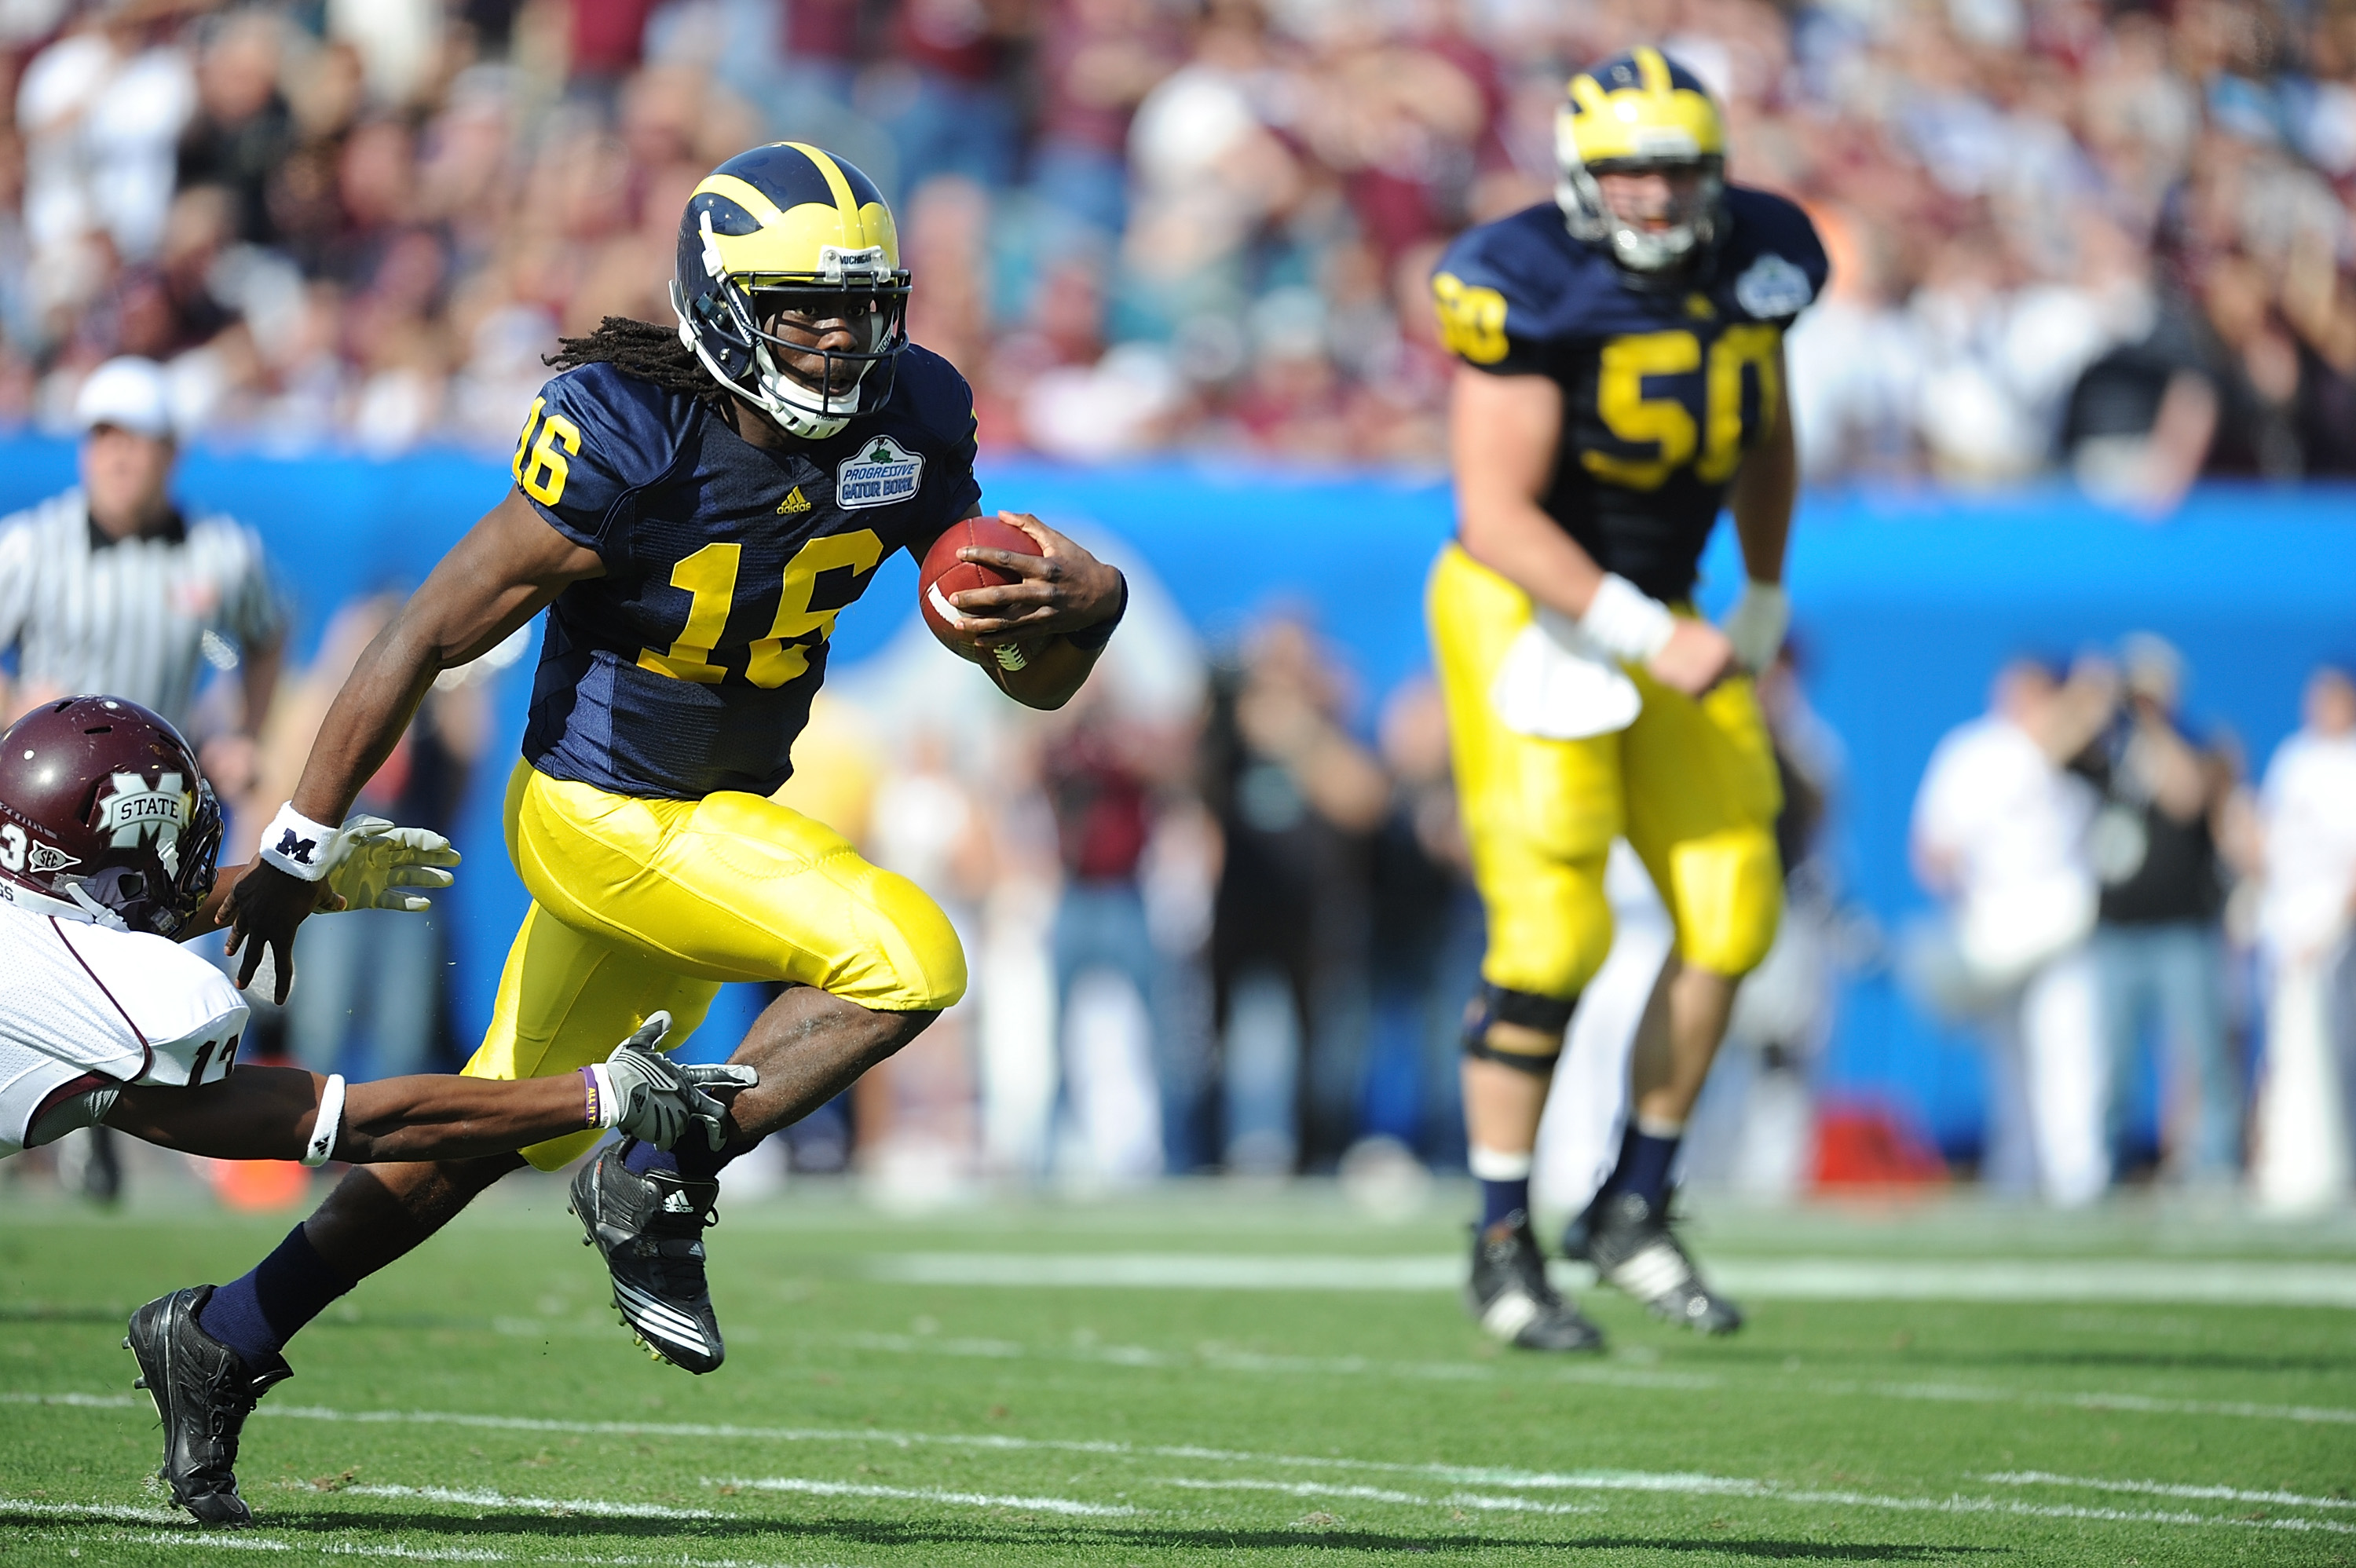 JACKSONVILLE, FL - JANUARY 01:  Quarterback Denard Robinson #16 of the Michigan Wolverines rushes against the Mississippi State Bulldogs during the Gator Bowl at EverBank Field on January 1, 2011 in Jacksonville, Florida  (Photo by Rick Dole/Getty Images)